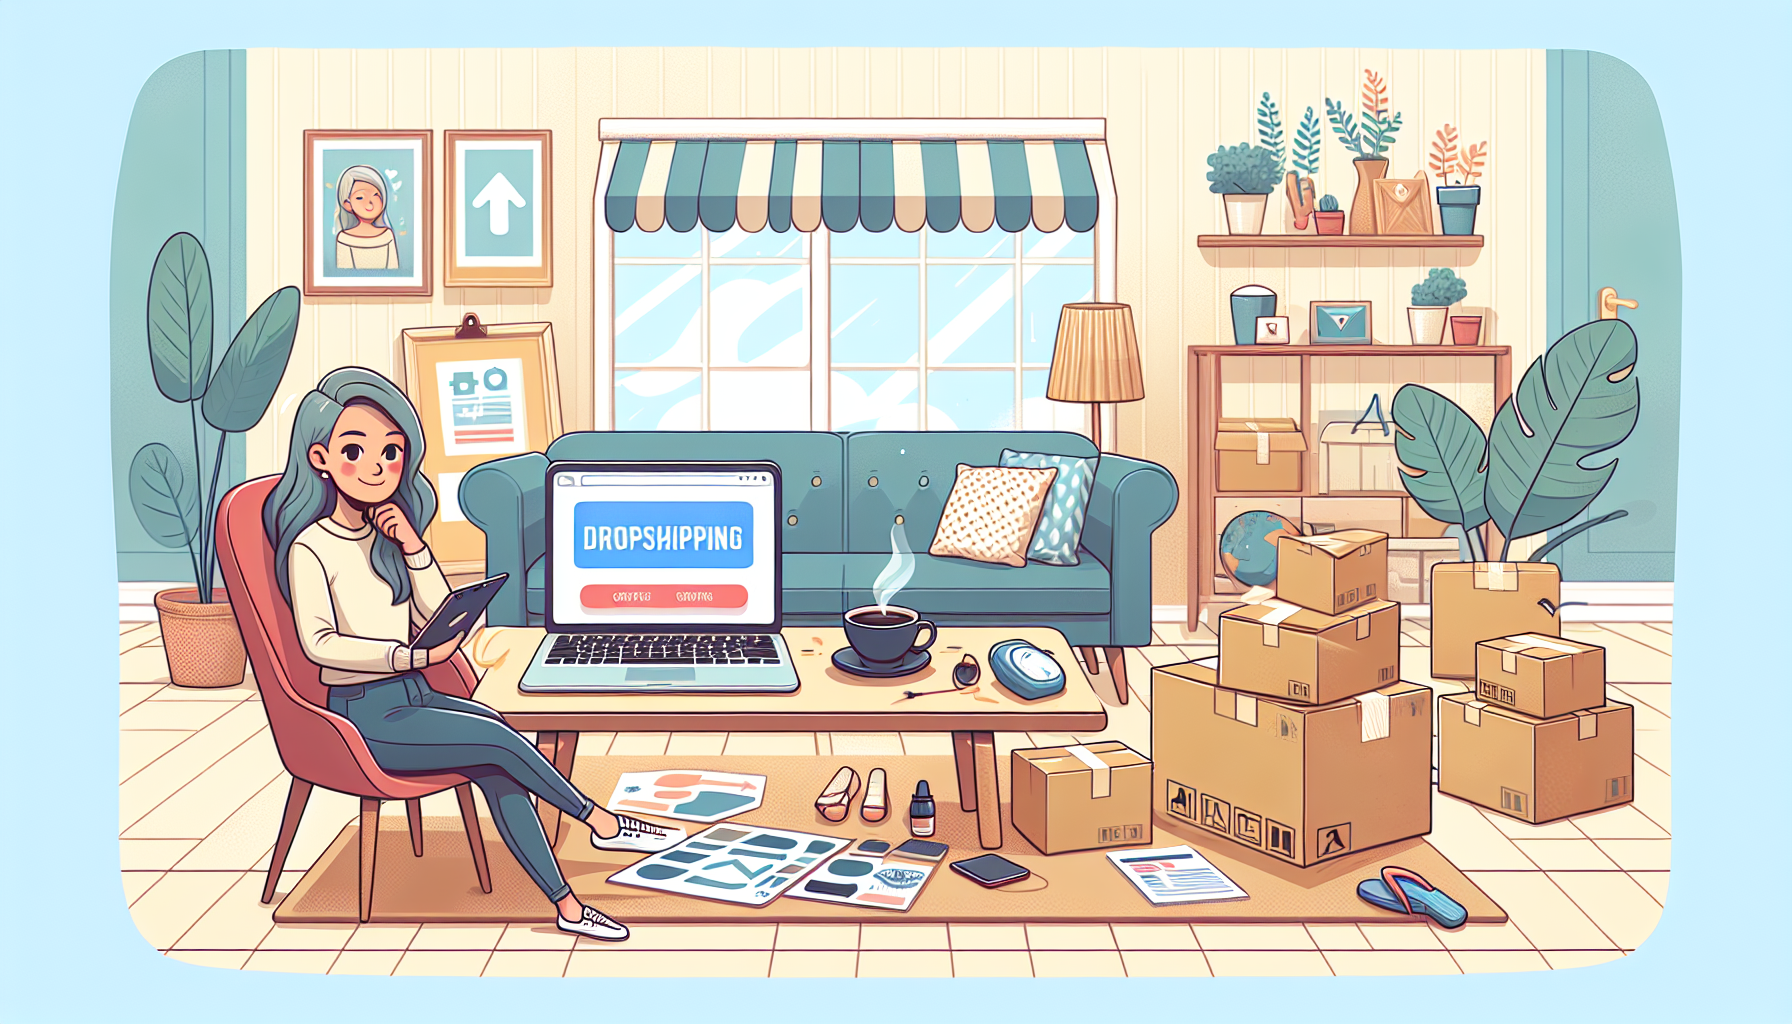 Create an illustration that depicts a person at home starting their profitable dropshipping side hustle. The scene should include a laptop showing an online store interface, a cup of coffee, and various shipping and packaging supplies around. The background should hint at a cozy home environment with simple yet organized decor, symbolizing a beginner's entrepreneurial journey in a relatable and motivational way.